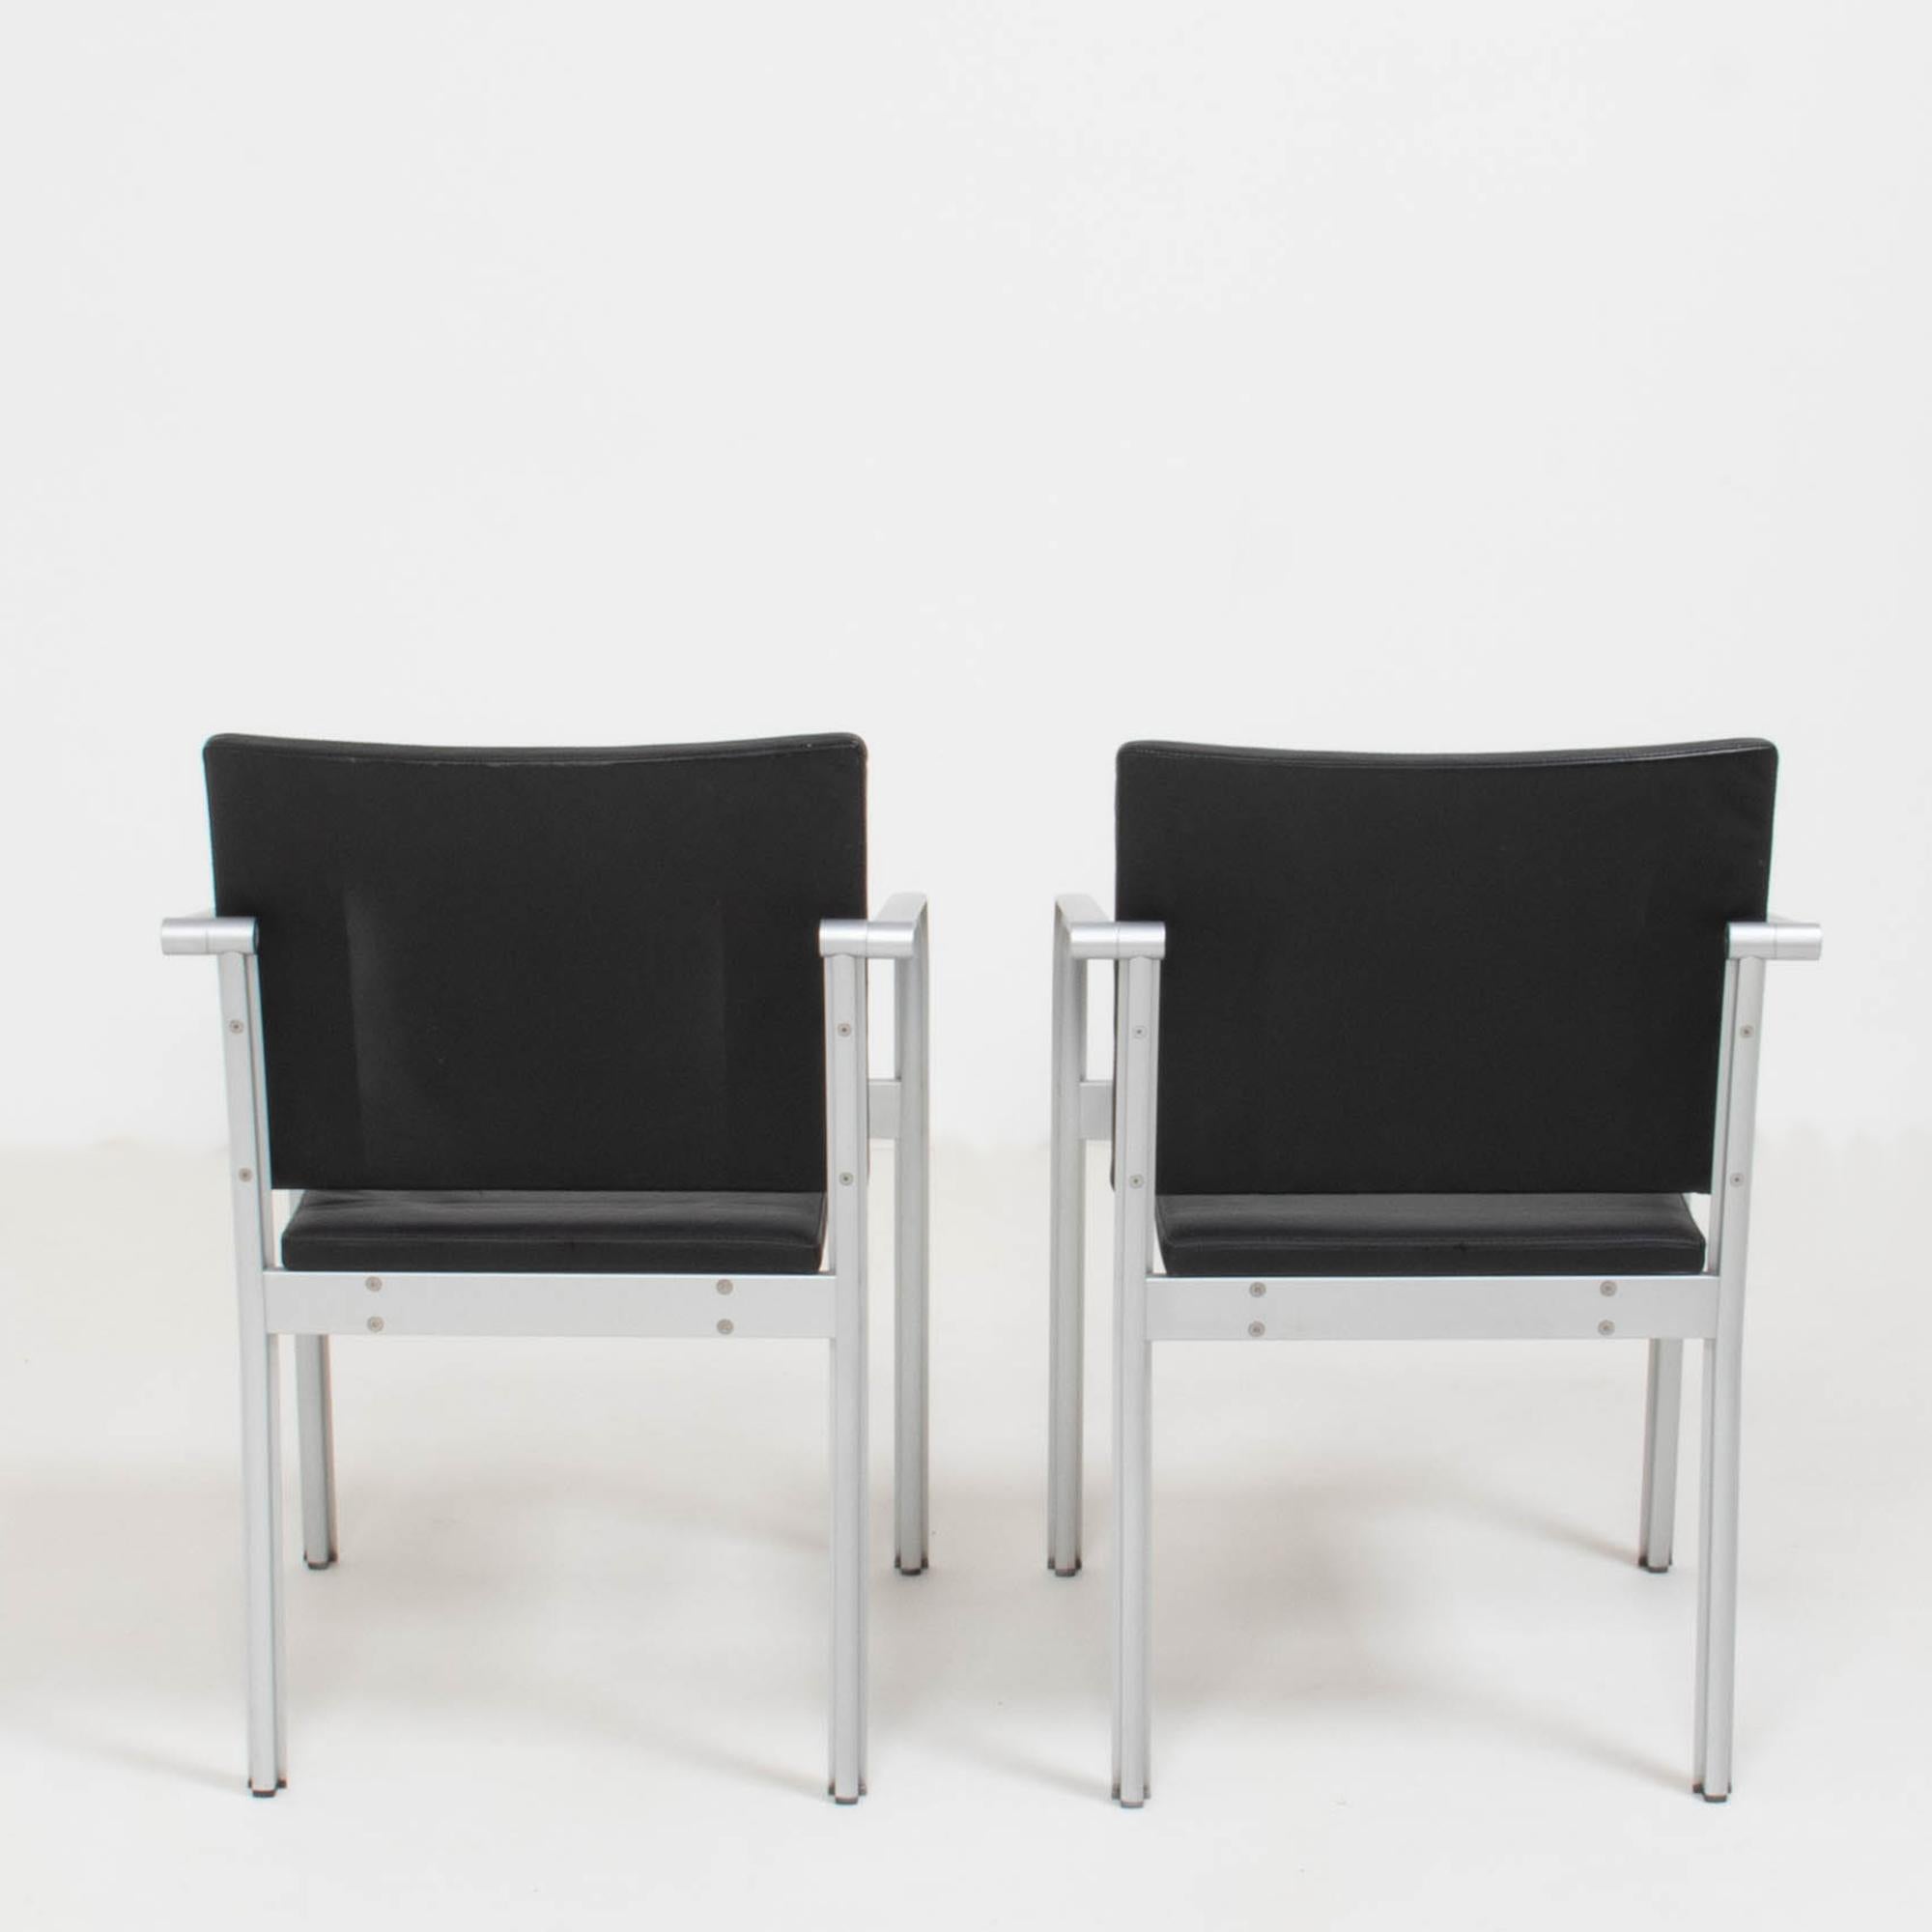 Thonet by Norman Foster A901 PF Aluminium and Black Leather Dining Chairs, Pair In Good Condition In London, GB